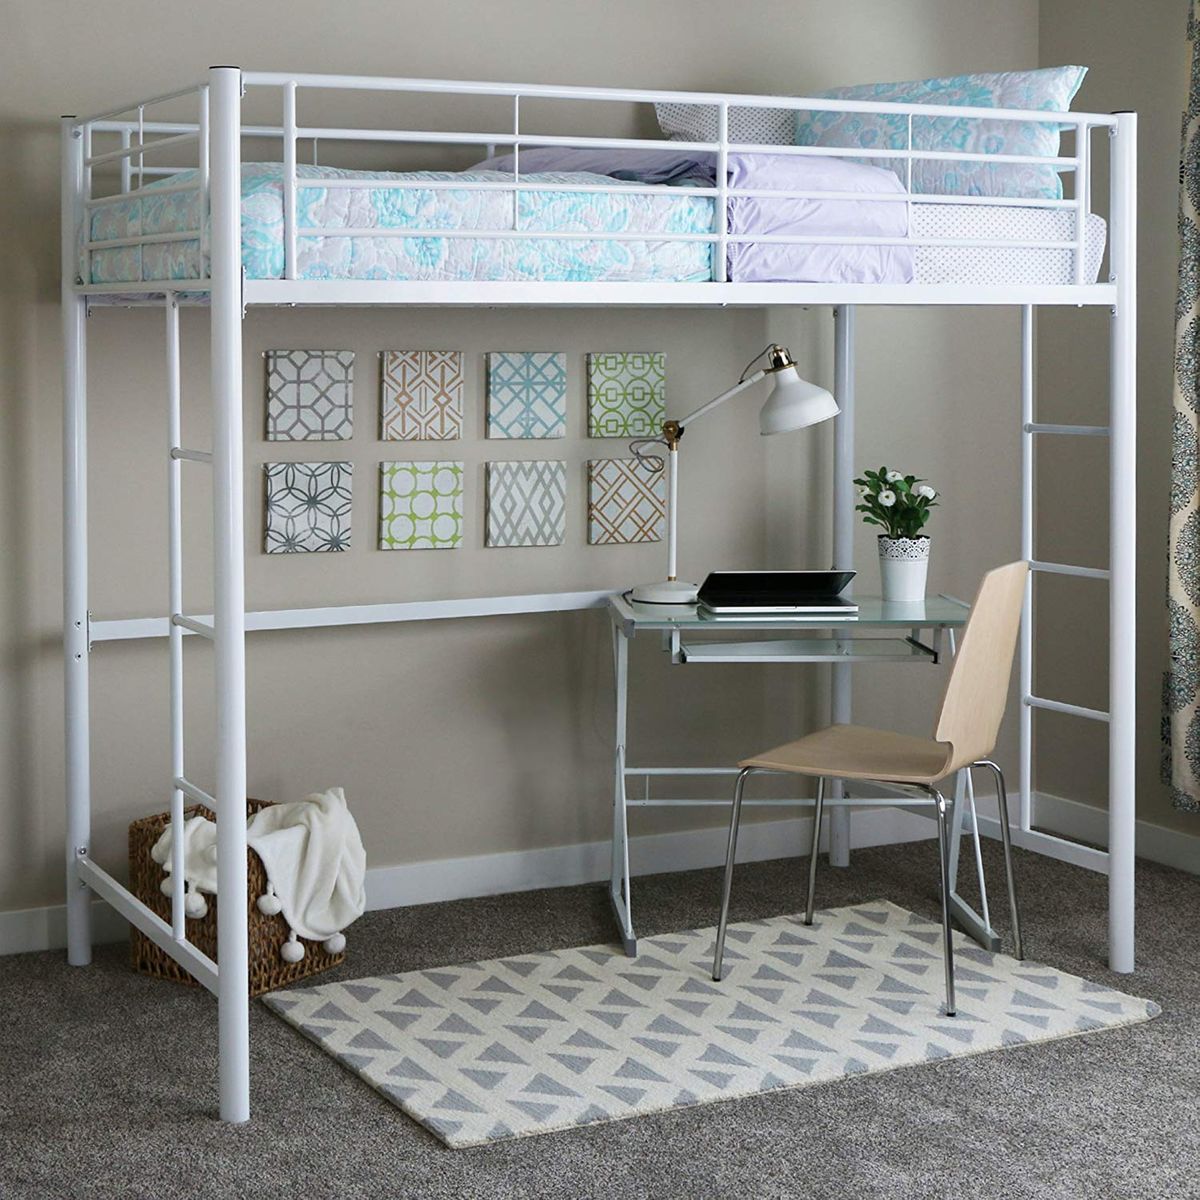 8 Best Loft Beds 2019 The Strategist, How To Loft A Twin Bed